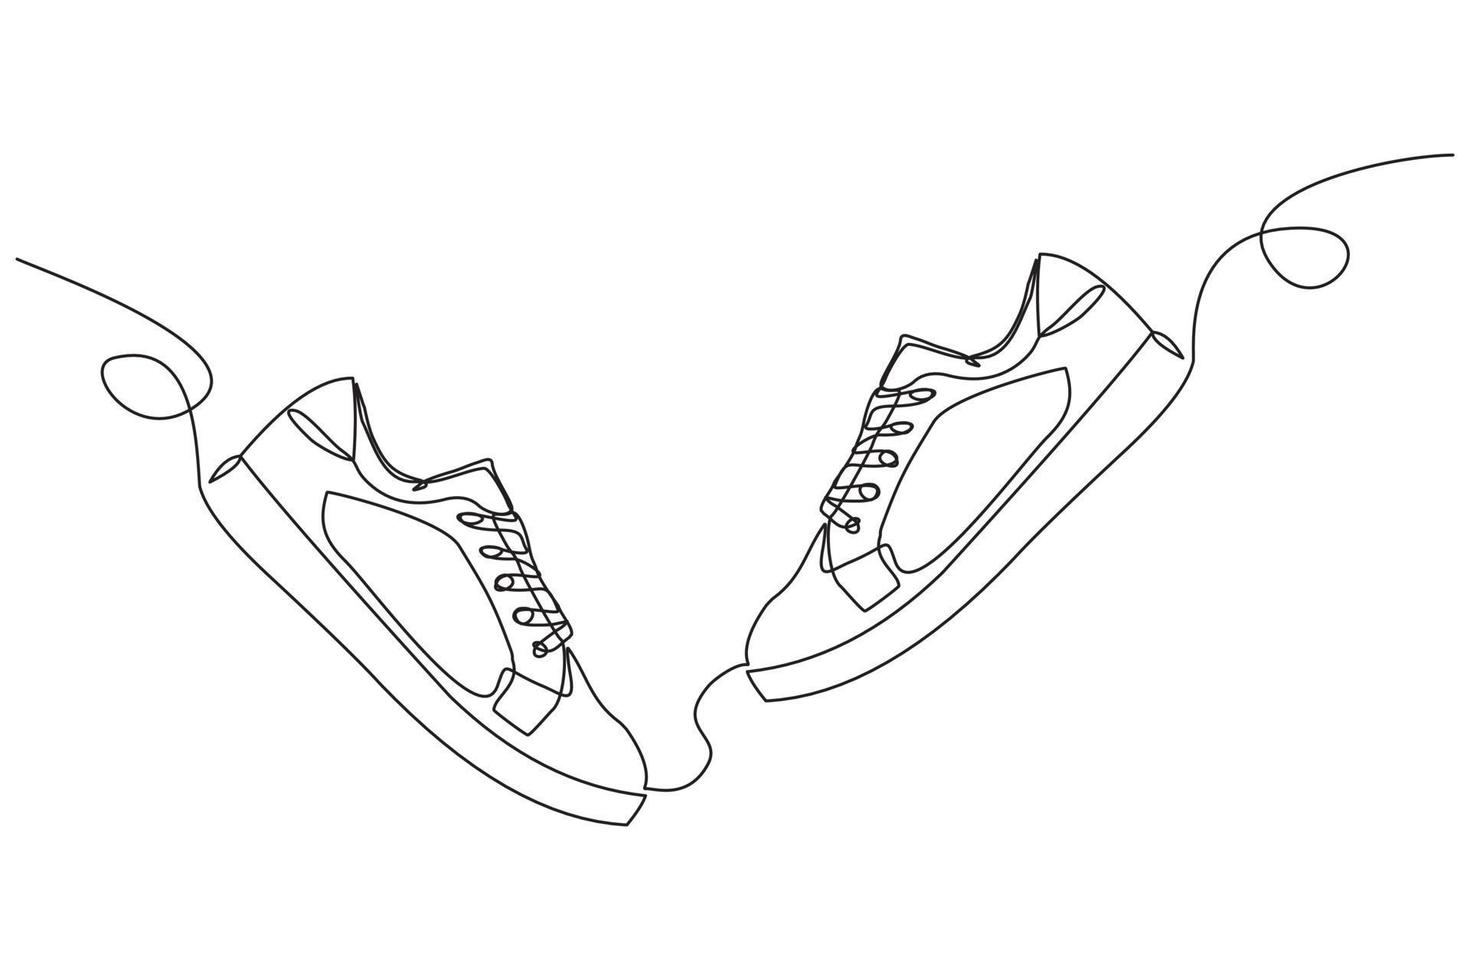 Continuous line drawing of casual sneakers shoes. Single one line art of sport shoes. Vector illustration